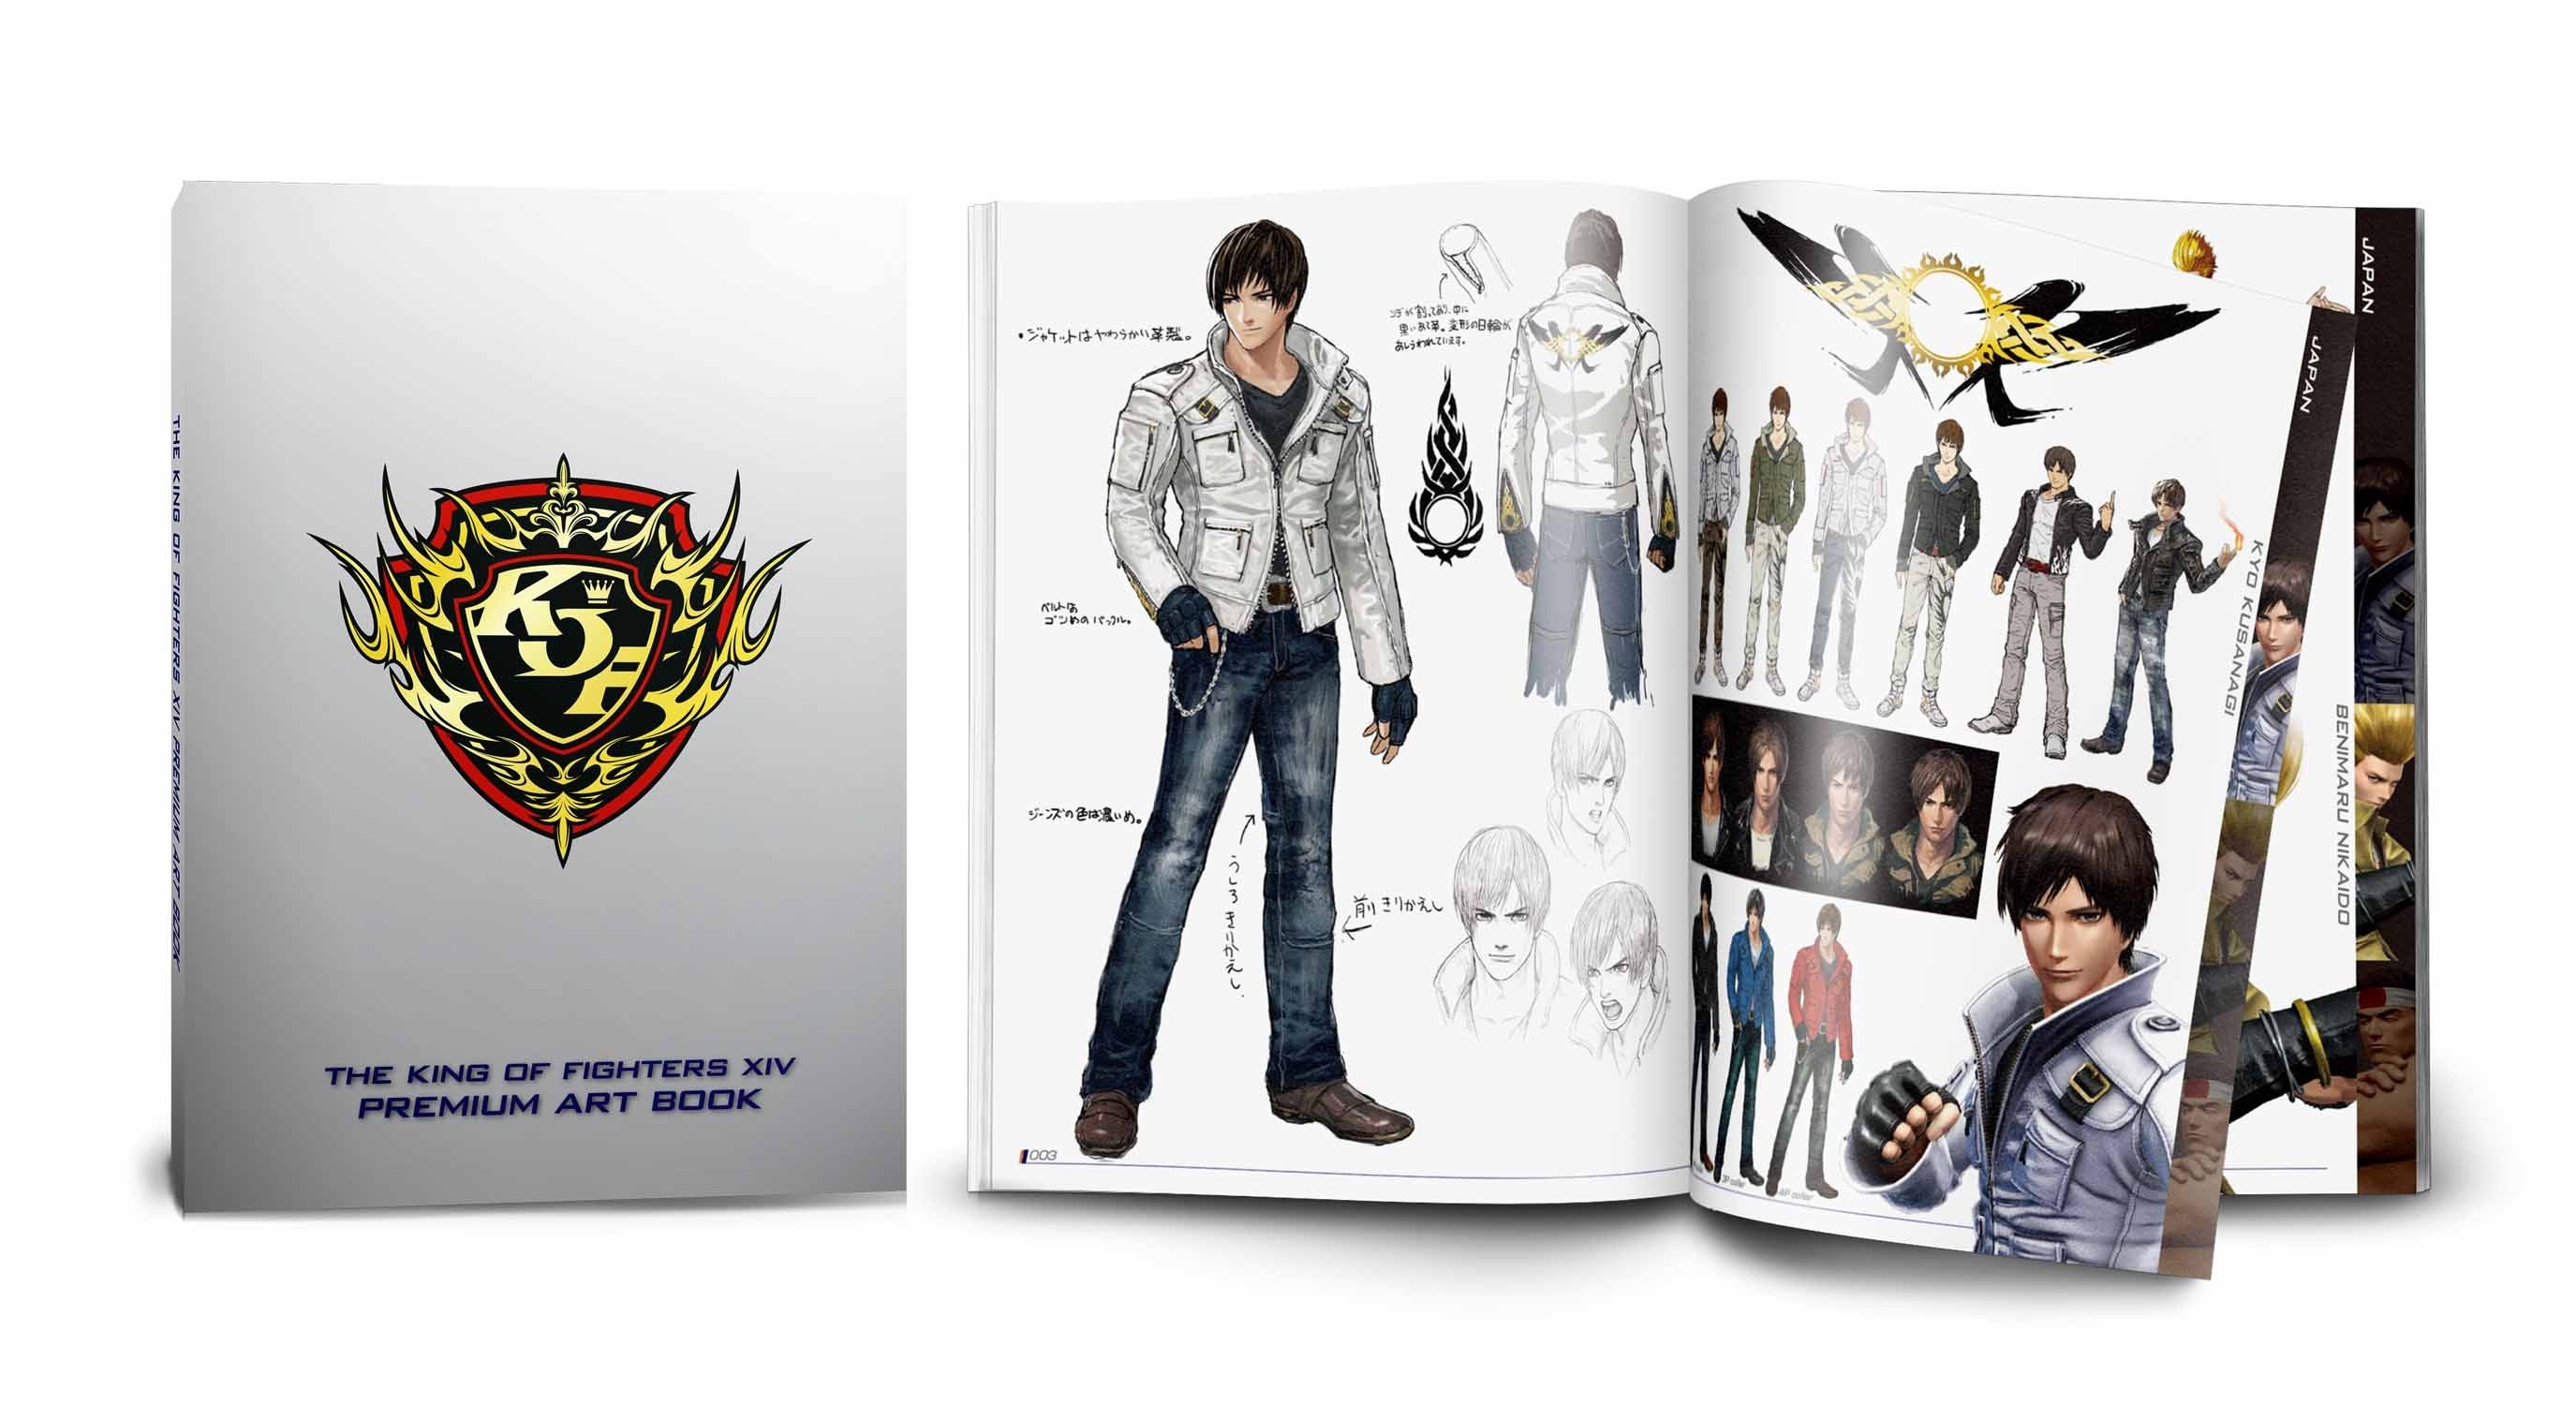 The King Of Fighters Xiv S First Print Bonus In Japan Is A Sweet